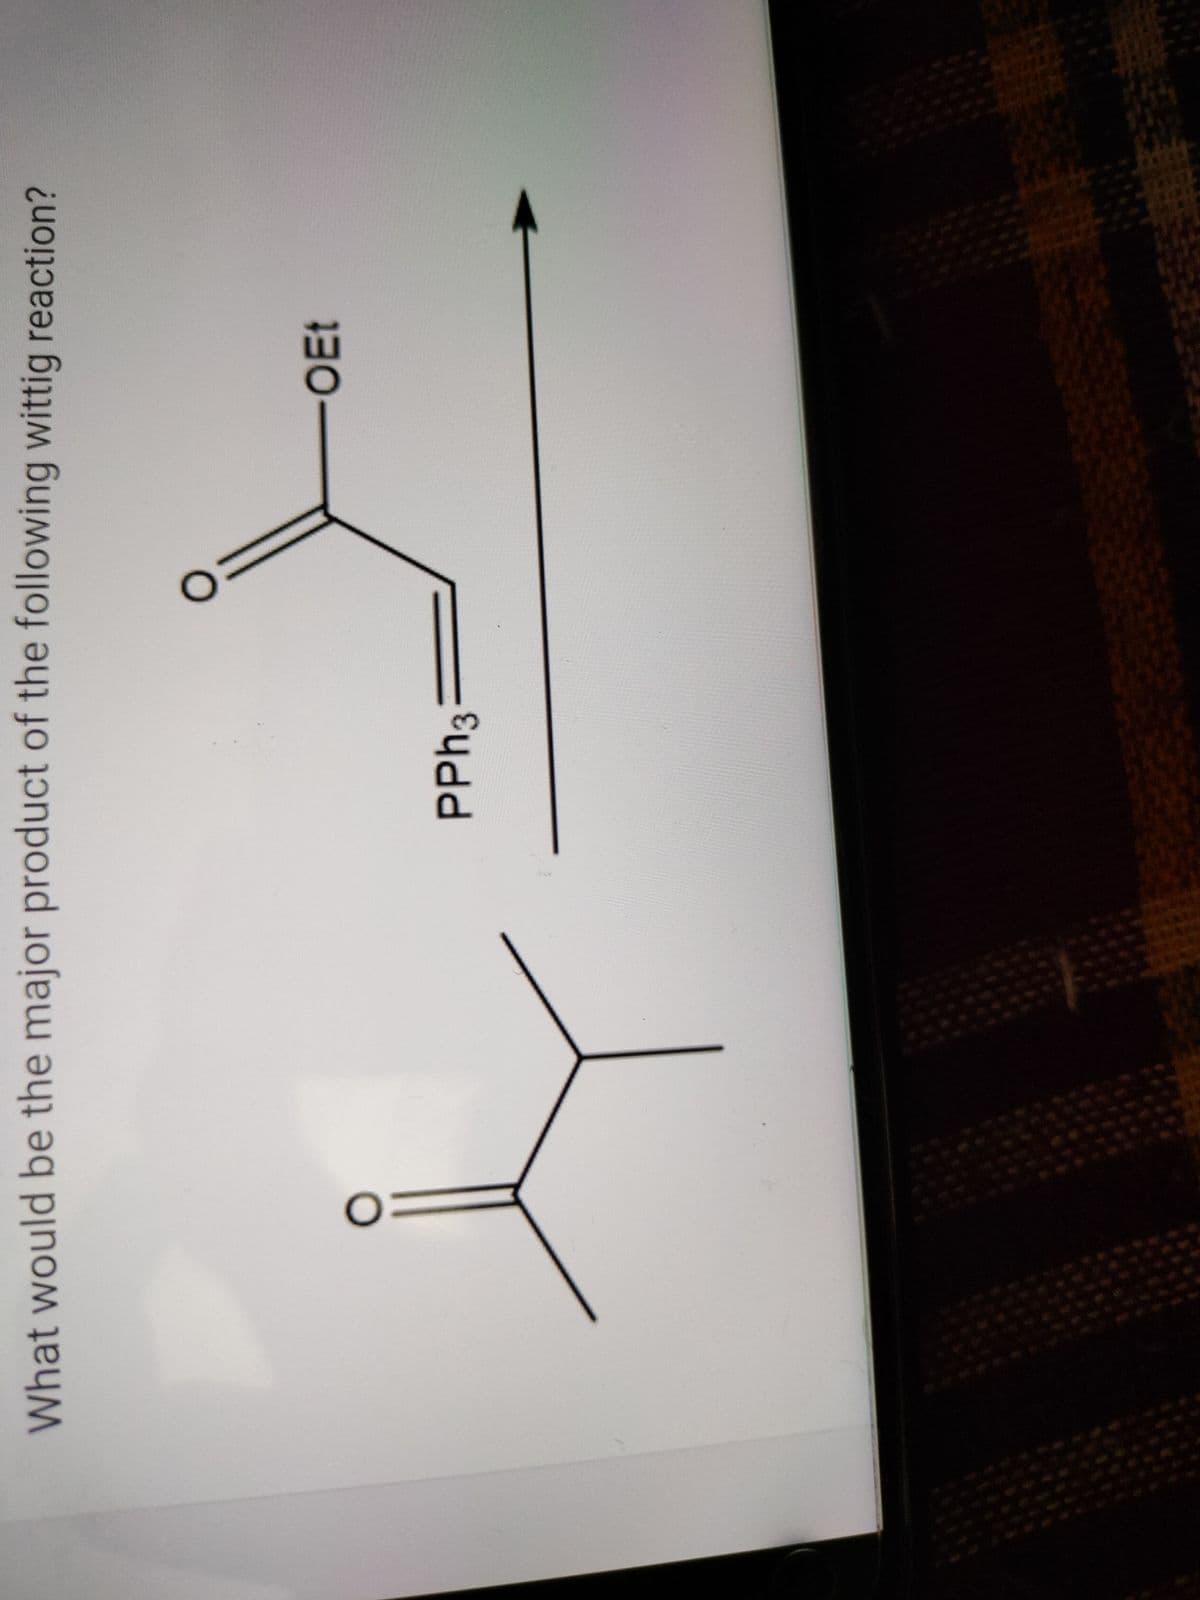 What would be the major product of the following wittig reaction?
-OEt
